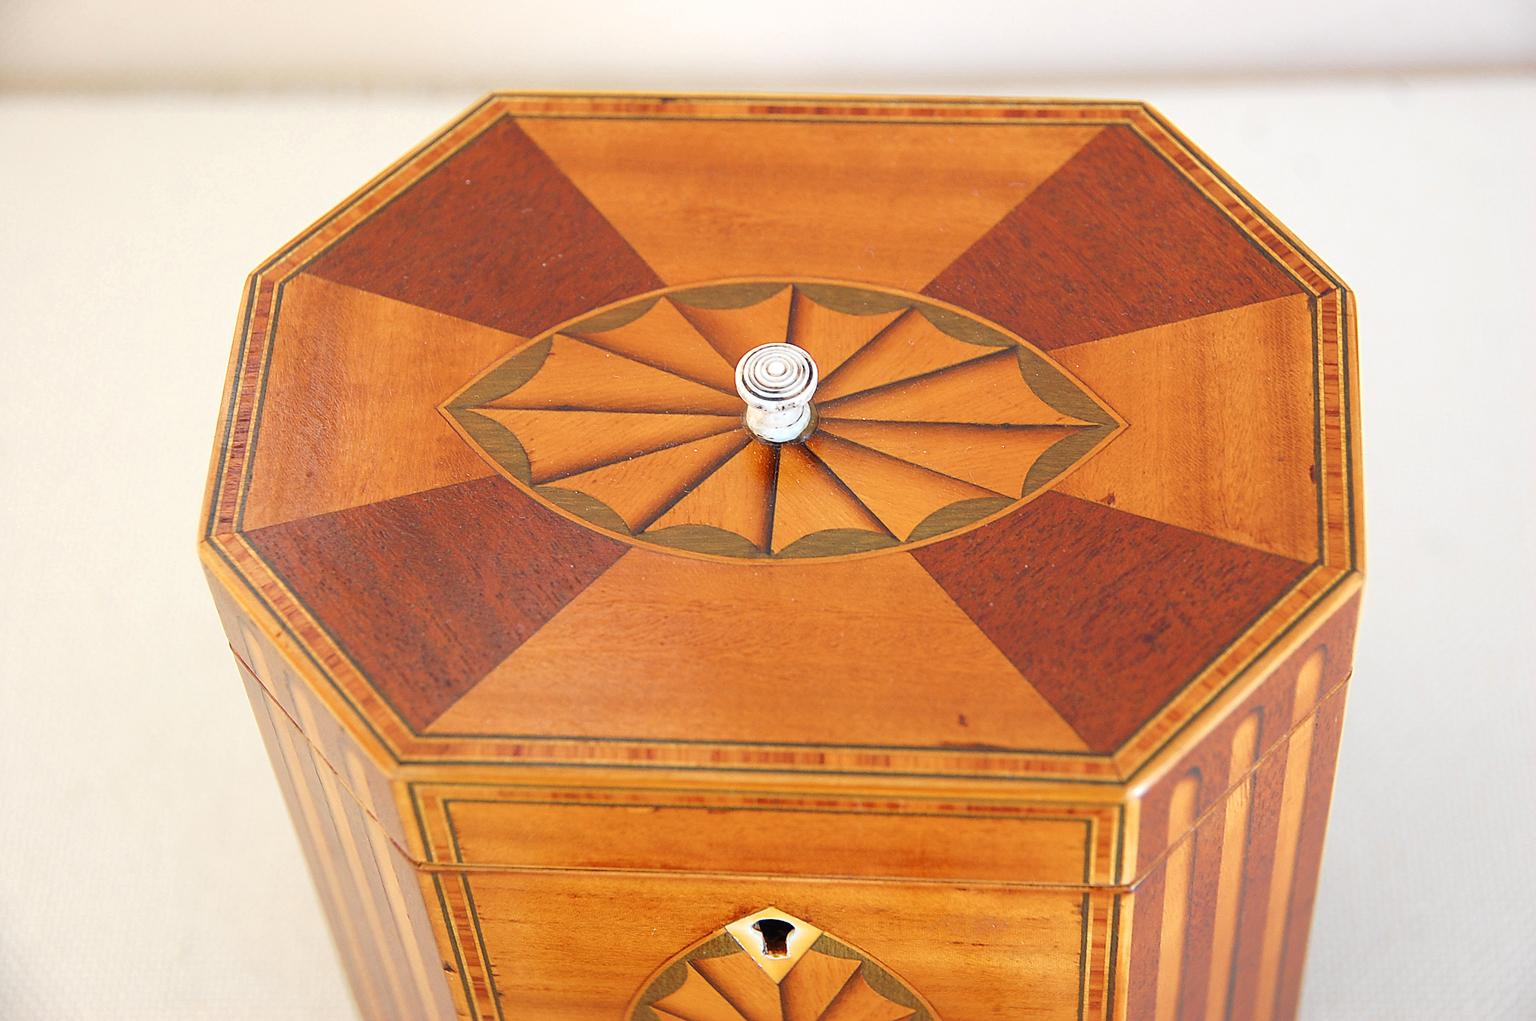 English Georgian octagonal tea caddy in satinwood and mahogany with inlaid columns and fans of stained and shaded boxwood, delicate stringing of crossbanded kingwood, complete with key, bone escutcheon and turned tiny handle to top of lid. The